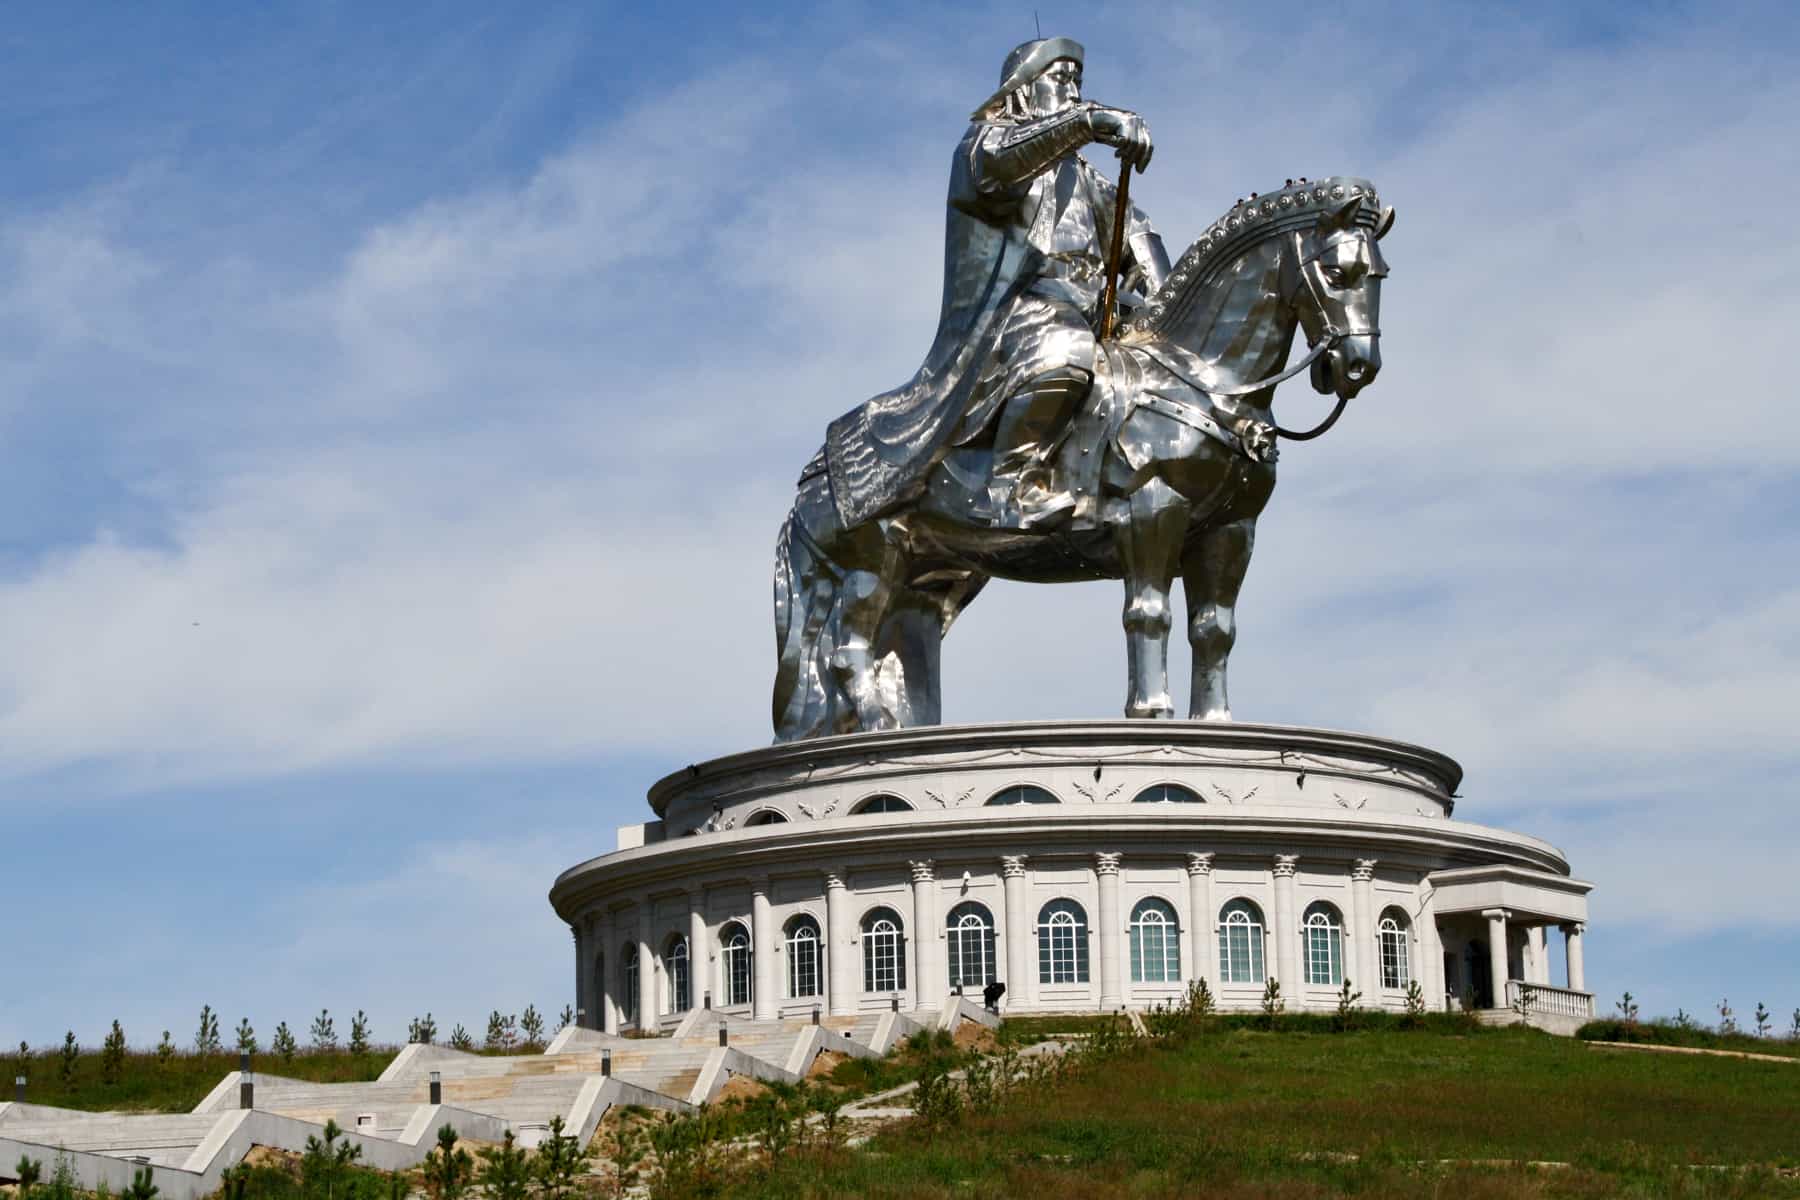 the giant, silver Genghis Khan Equestrian Statue in Mongolia